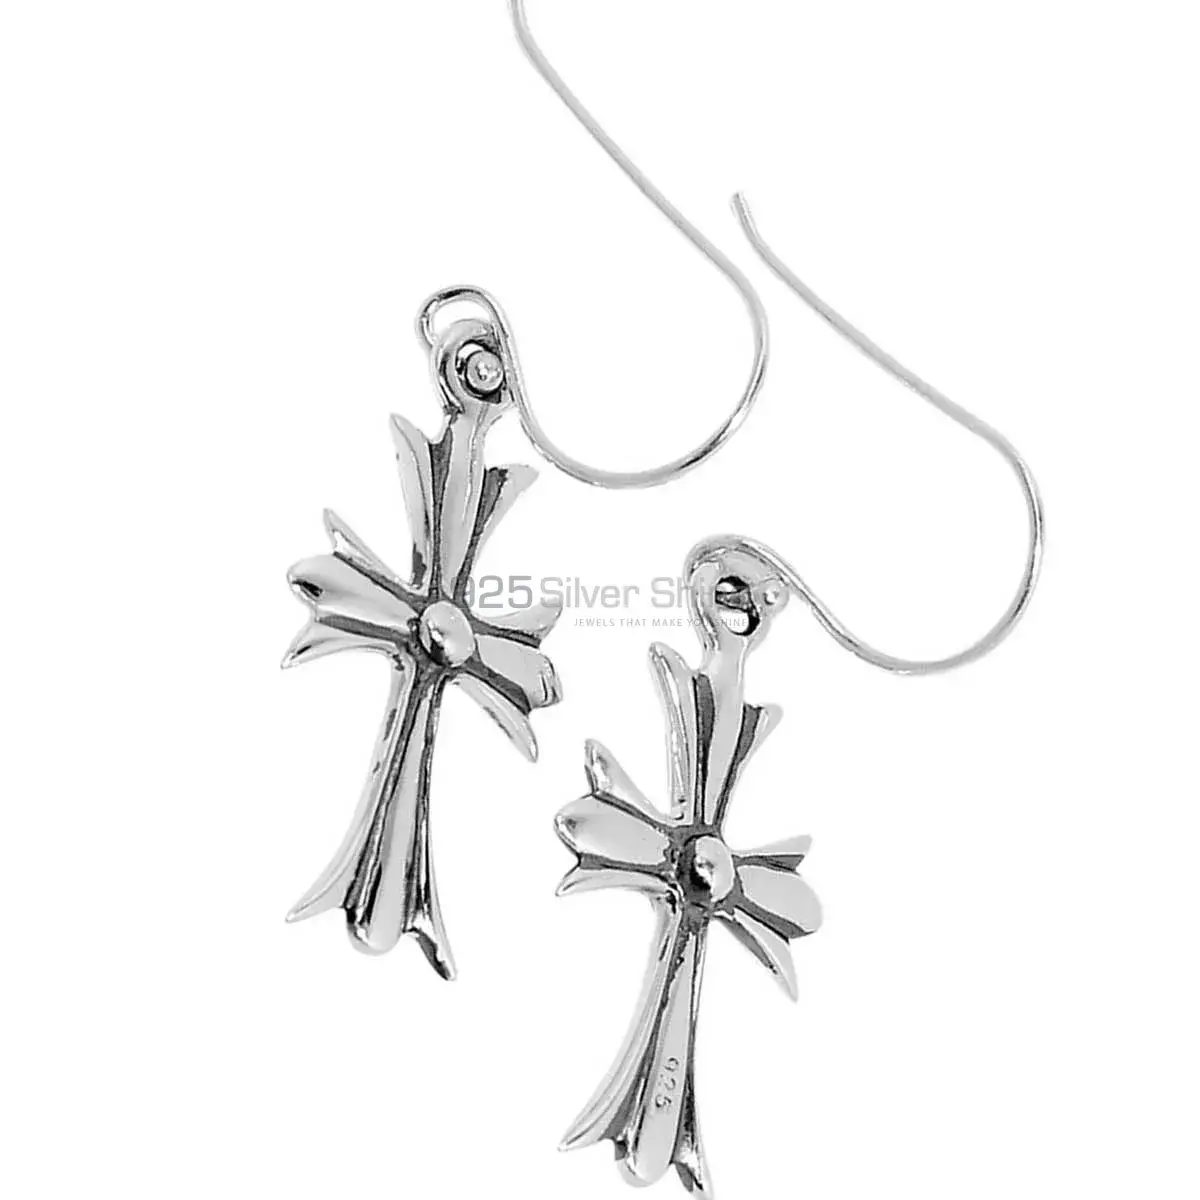 Inexpensive 925 Sterling Silver Oxidized Cross earring 925SE2862_3